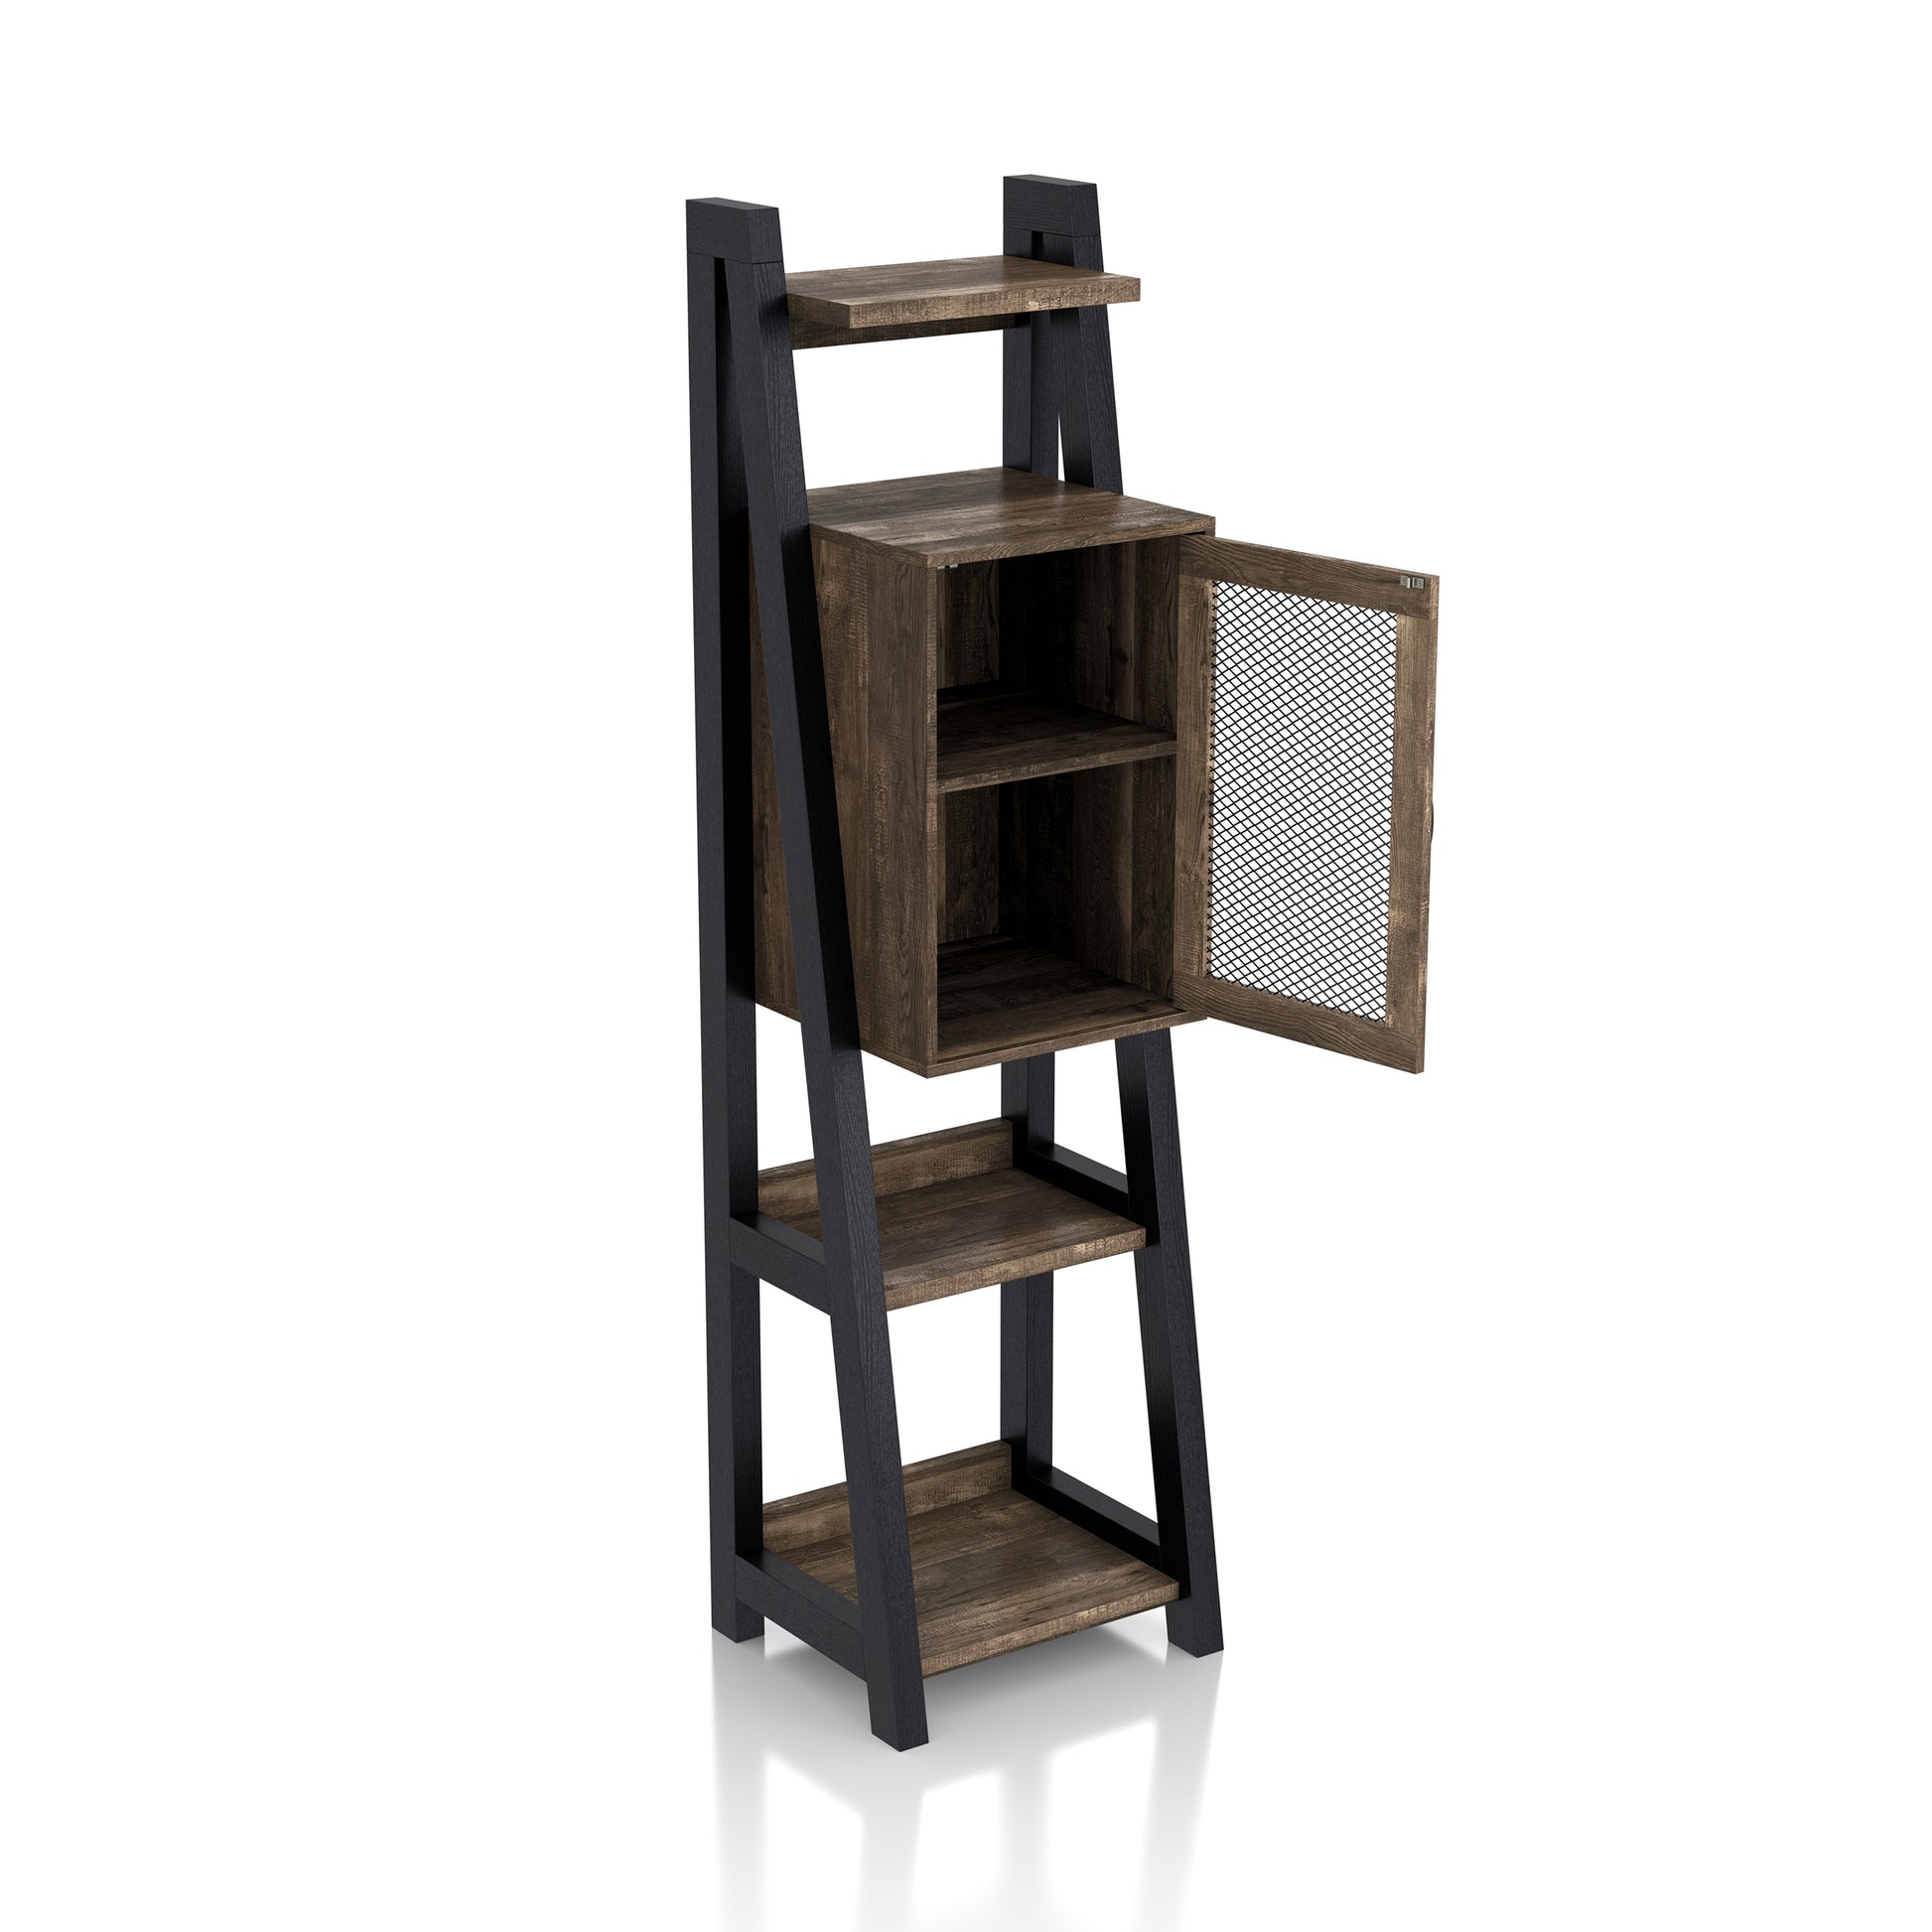 Right angled farmhouse reclaimed oak and black six-shelf one-cabinet compact bookcase with mesh door open on a white background